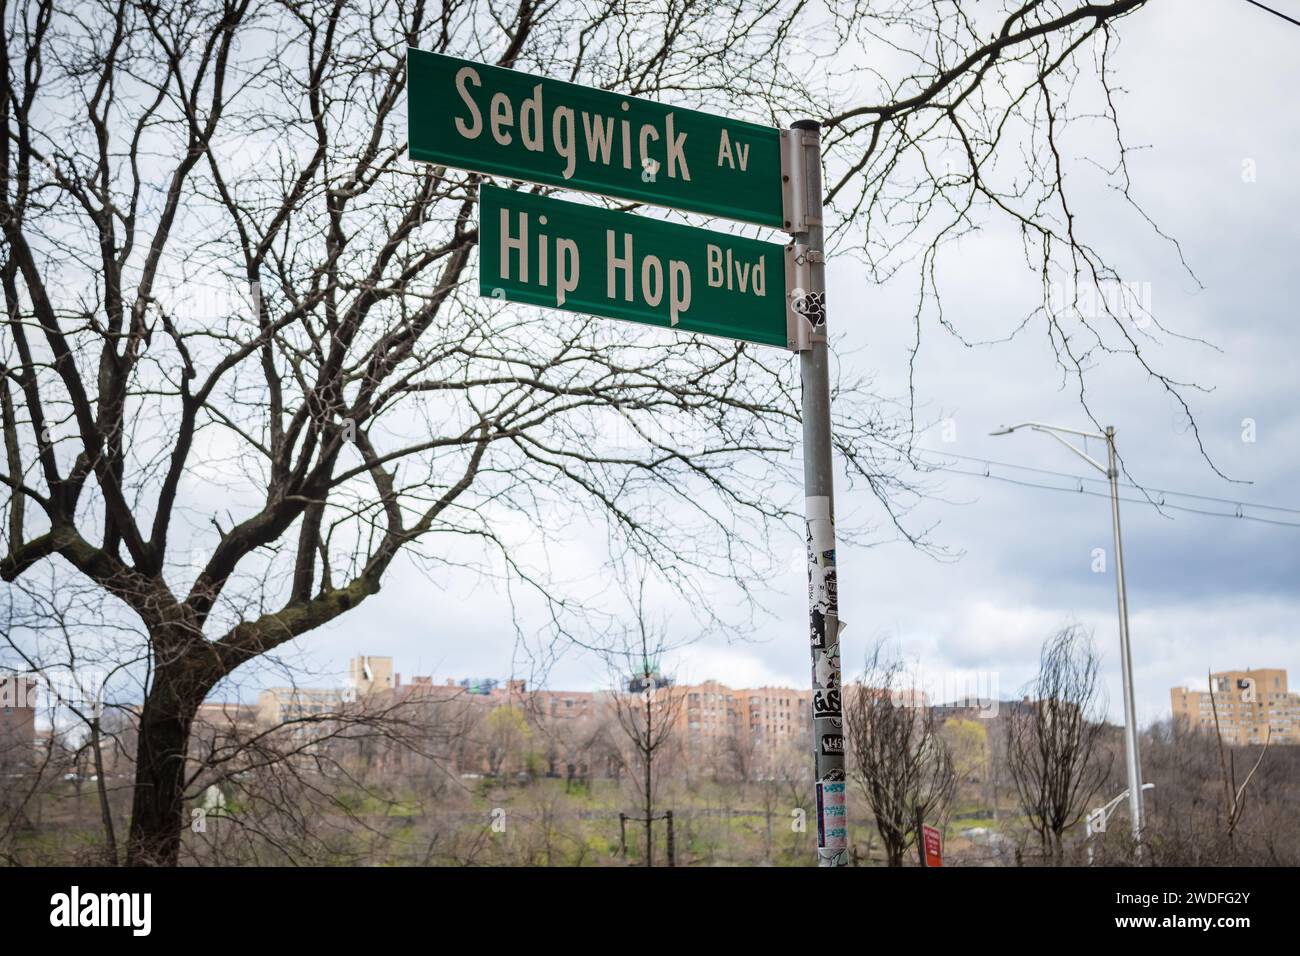 Street signs in Sedgwick Avenue, The Bronx, New York. The Birthplace of Hip Hop music. Stock Photo